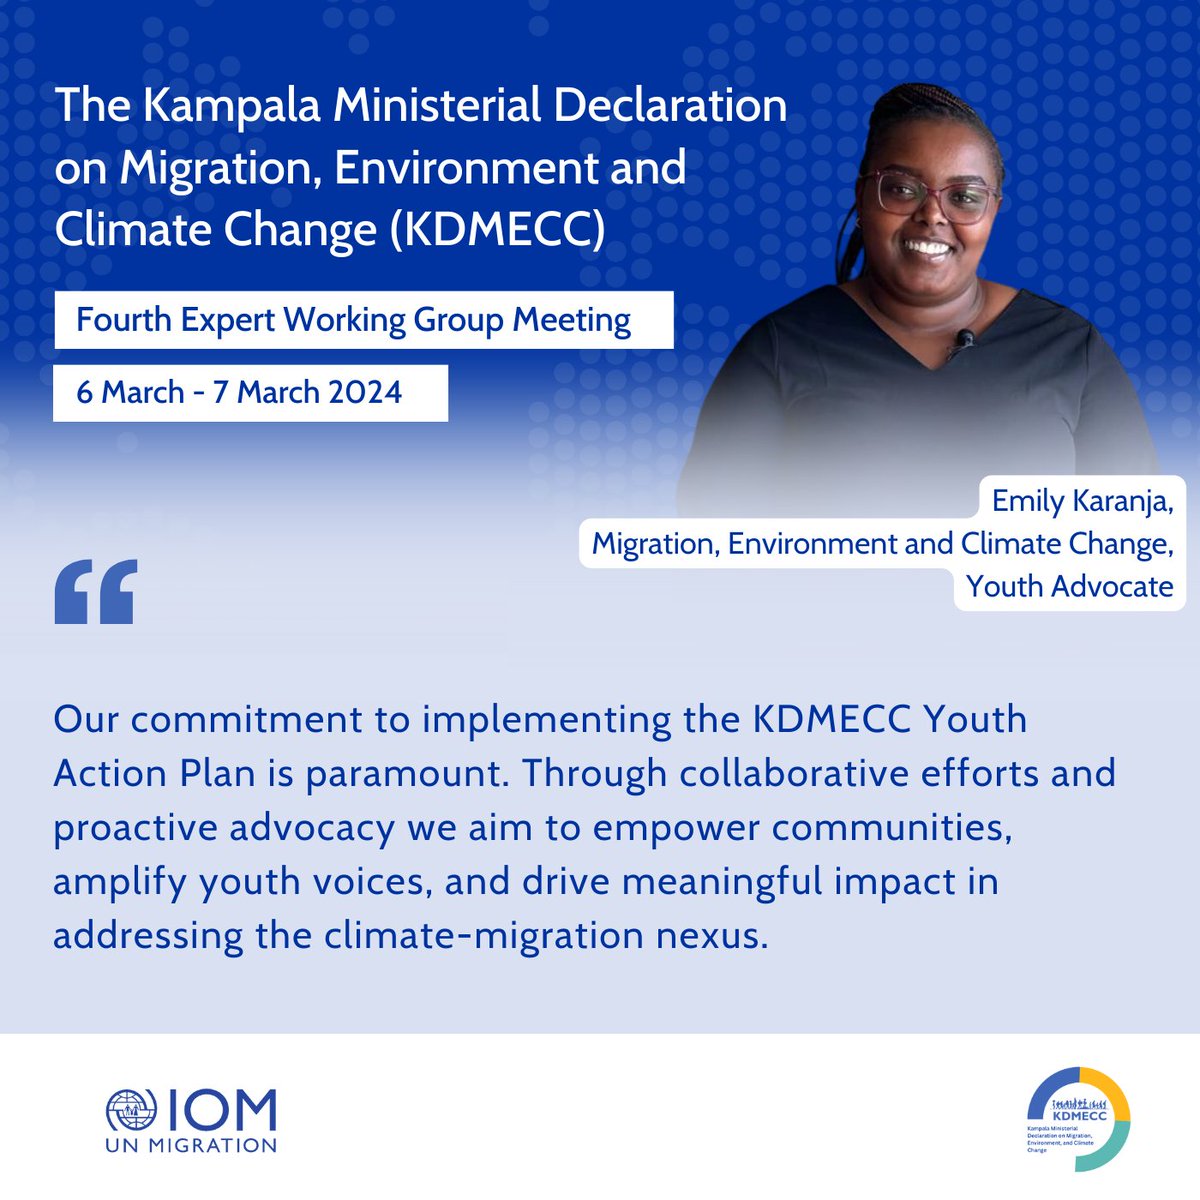 The proposed youth Plan of Action addresses the urgent need for climate action, considering vulnerable groups like youth, children, and women.✅ The plan demonstrates the commitment of African youth to drive positive change in prioritising the #ClimateMigration nexus. #KDMECC